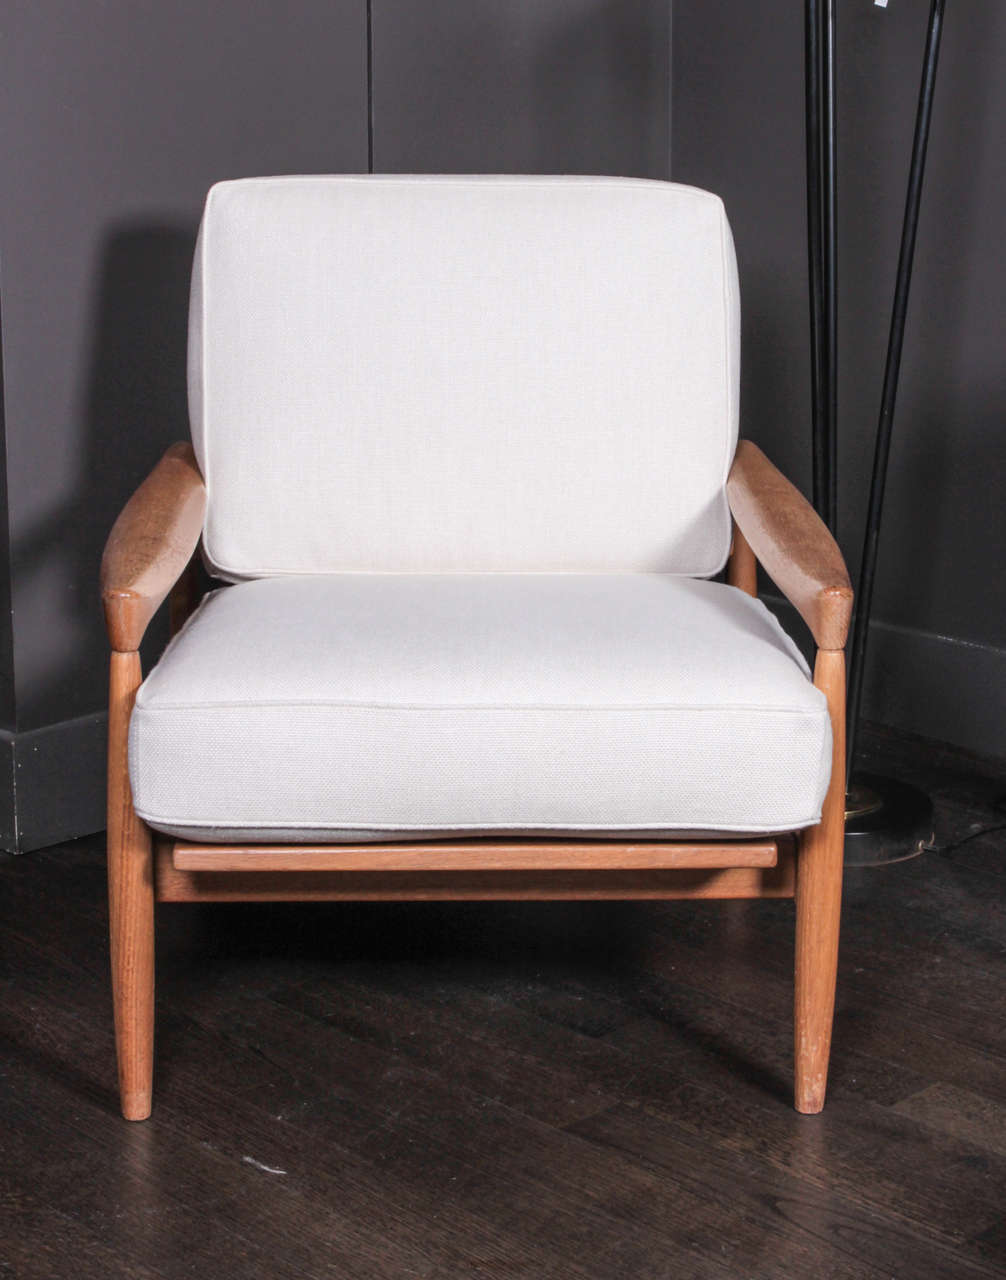 Mid Century teak arm chairs refurbished and reupholstered with 100% Belgium linen in natural.